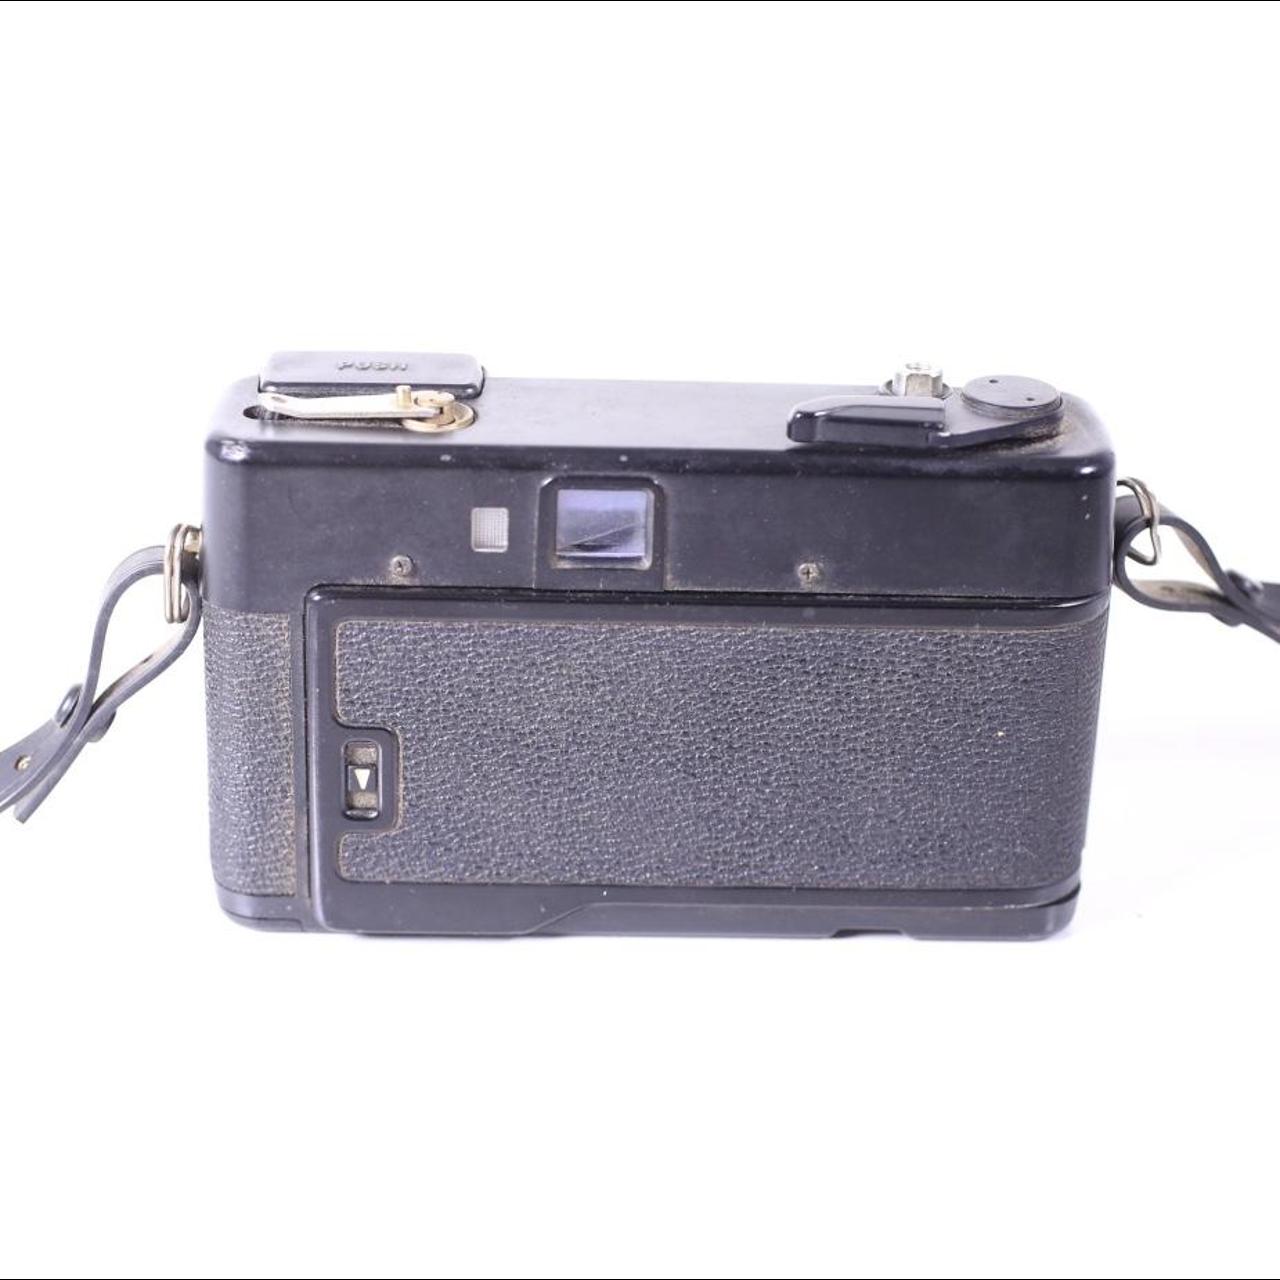 Yashica multi Cameras-and-accessories (4)